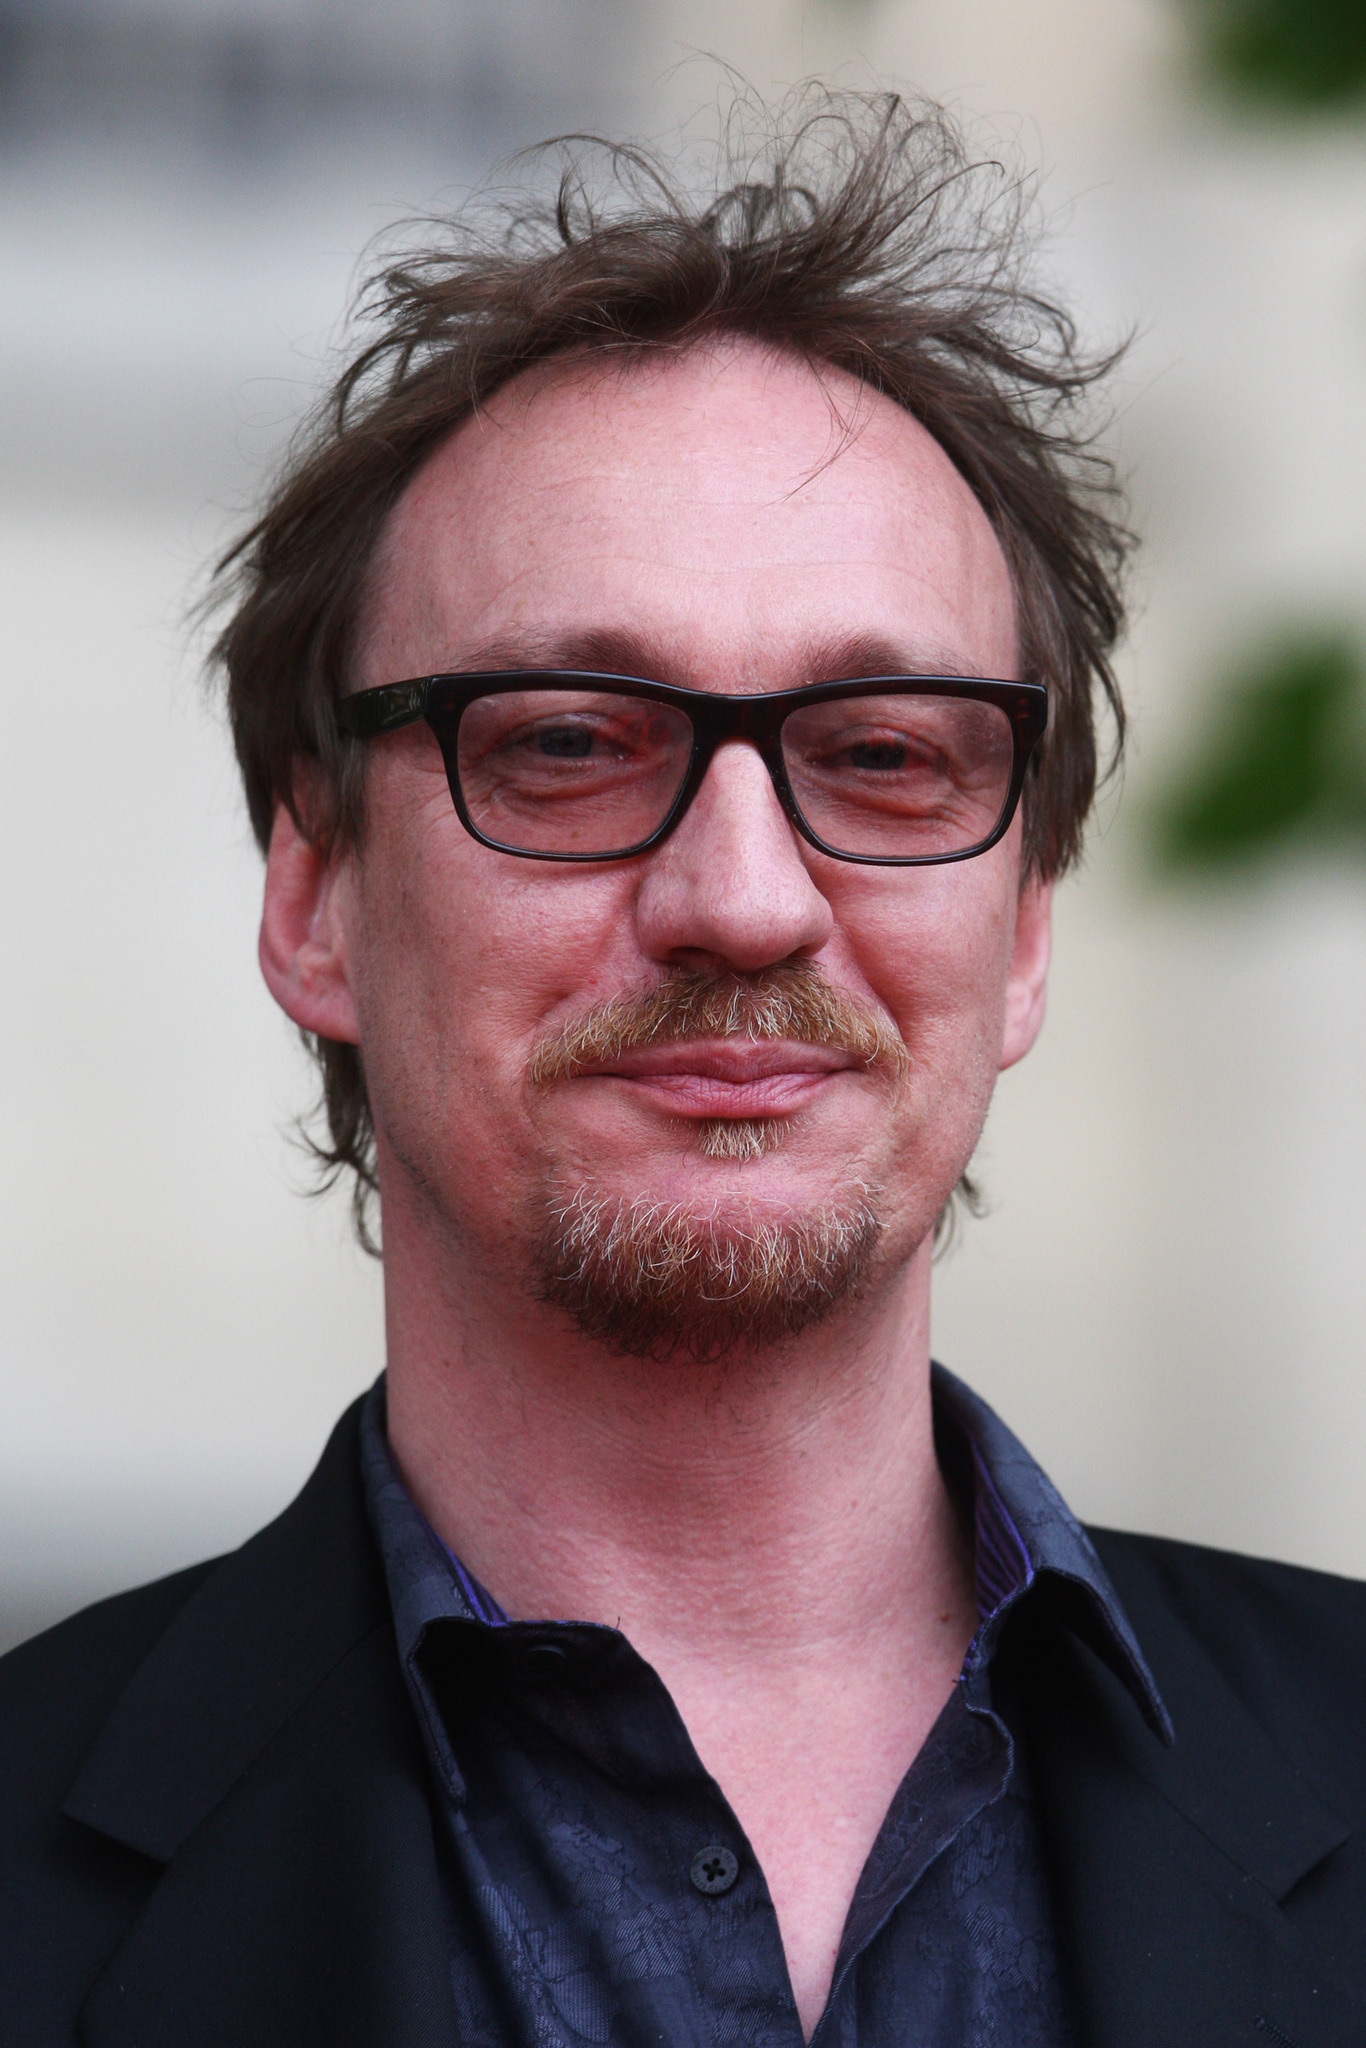 Who played Remus Lupin in the Harry Potter series? 2